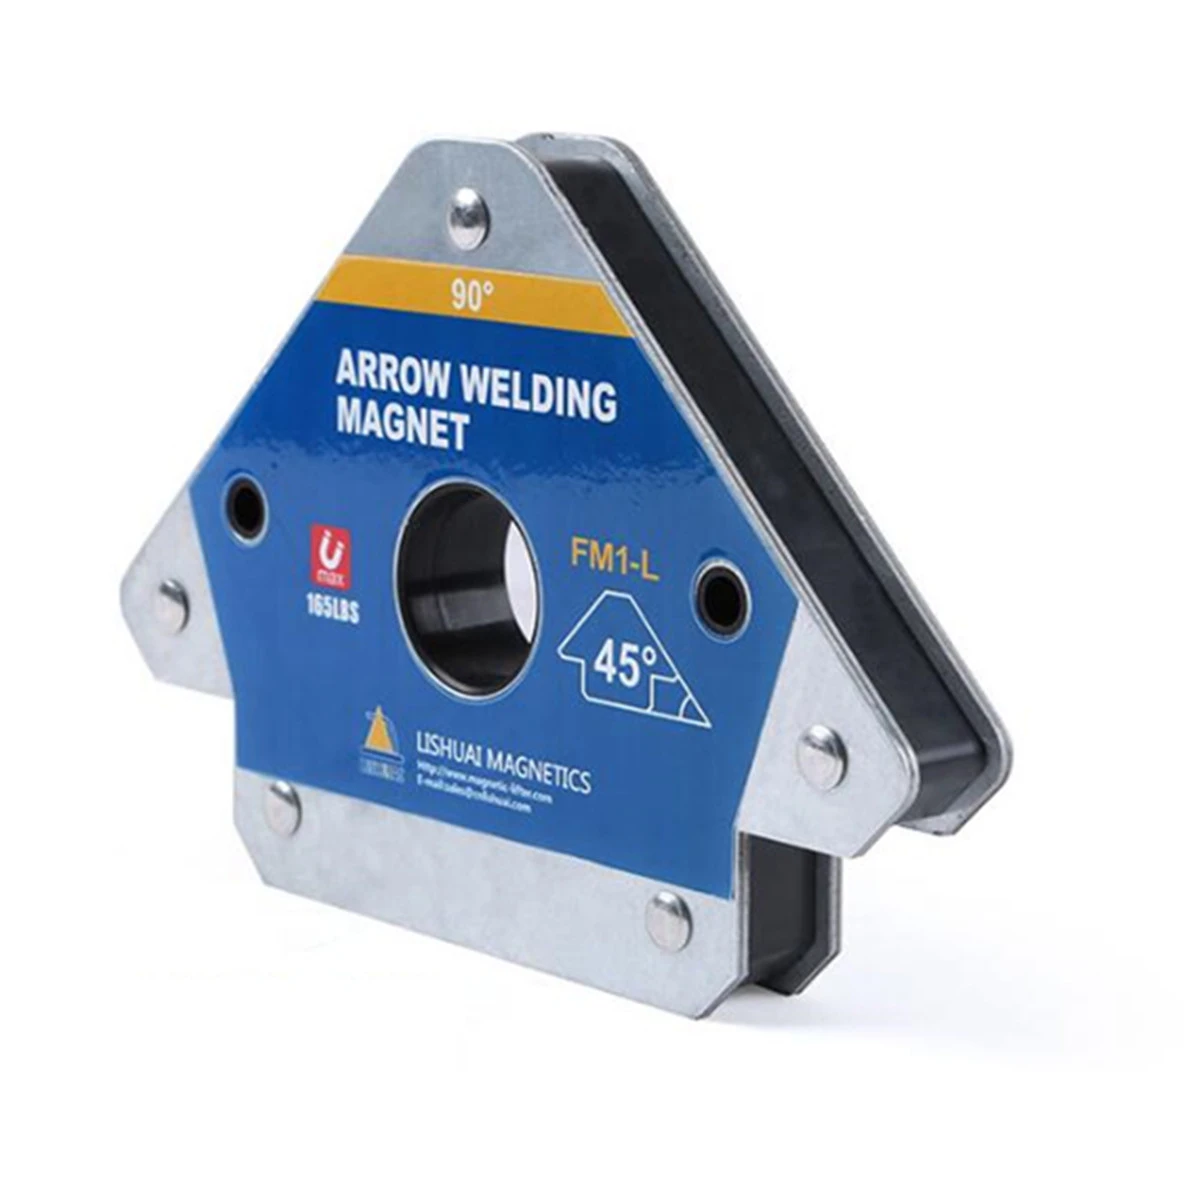 And Pipes Installation TANKSTORM CT603 Magnetic Welding Holder Arrow Shape For Multiple Angles Holds Up To 75 Lbs For Soldering Welding Assembly 